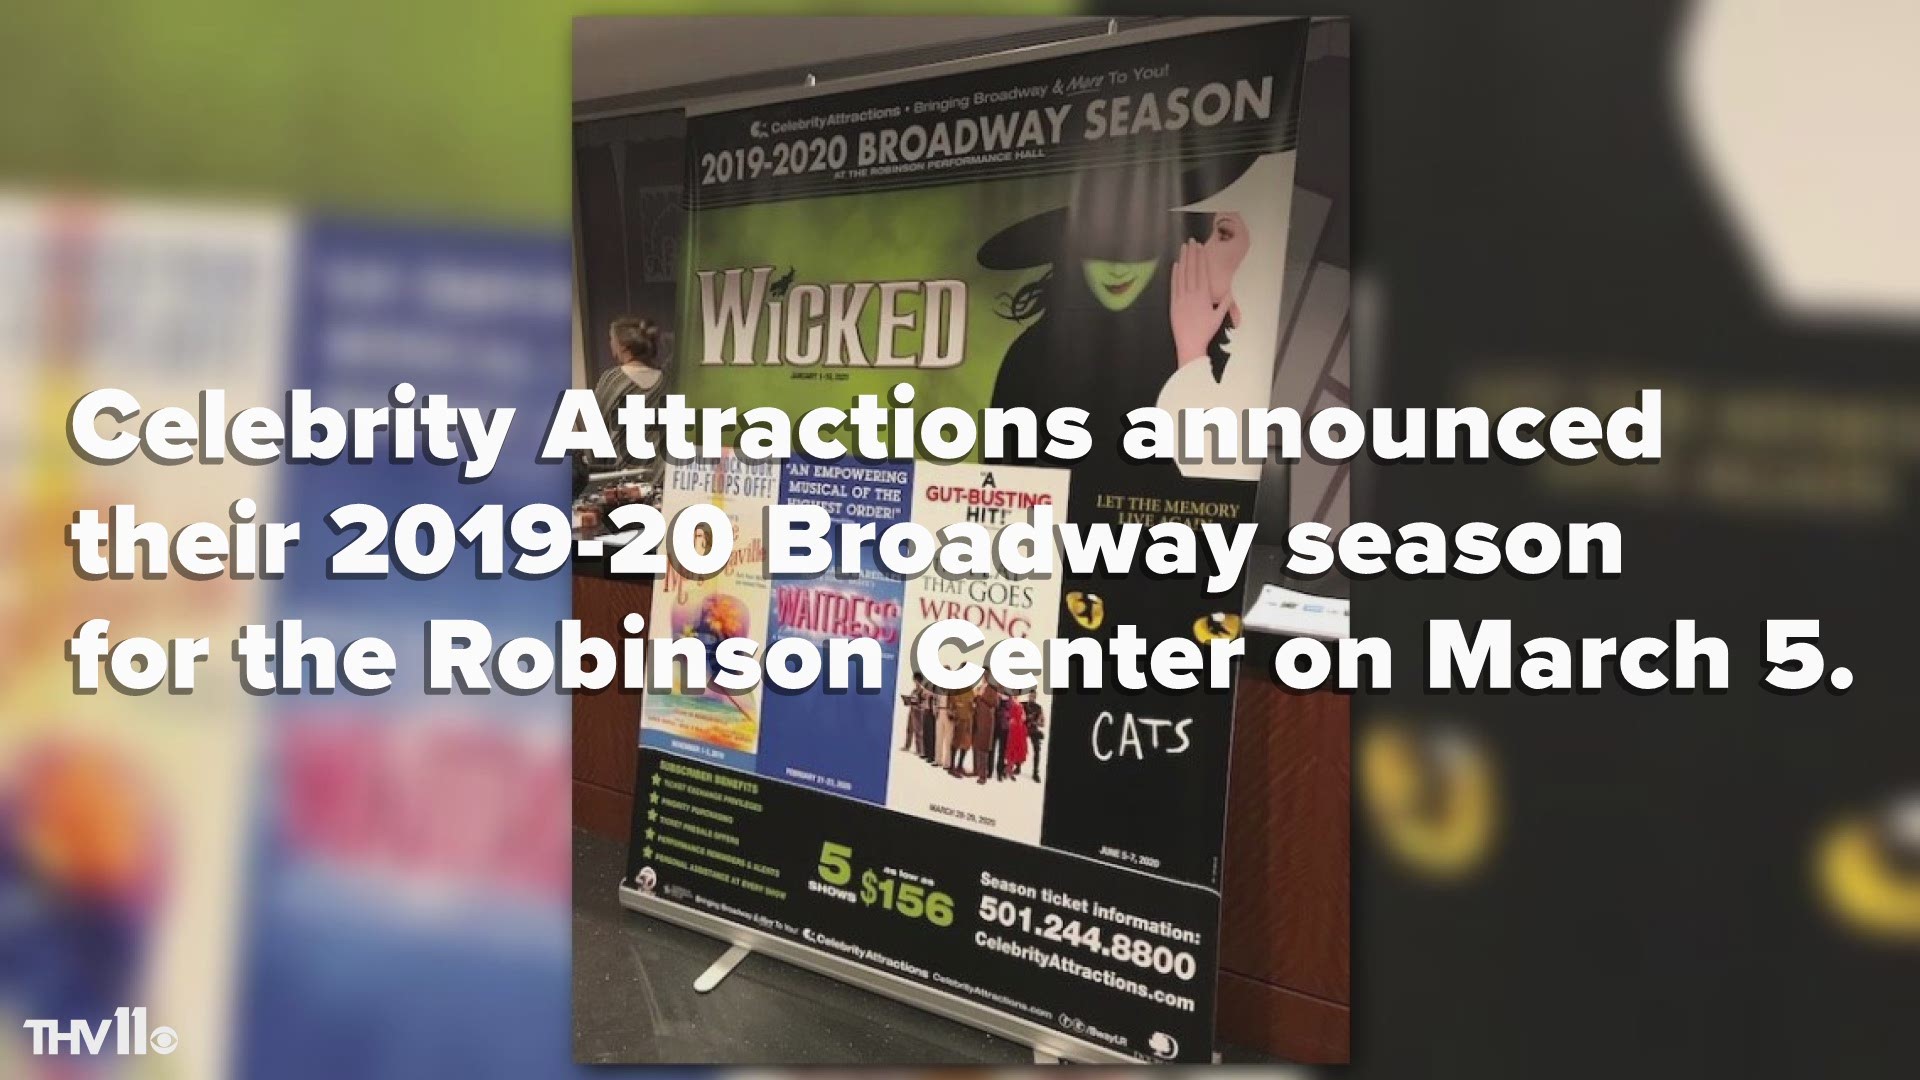 The lineup includes "Cats" and "Wicked."